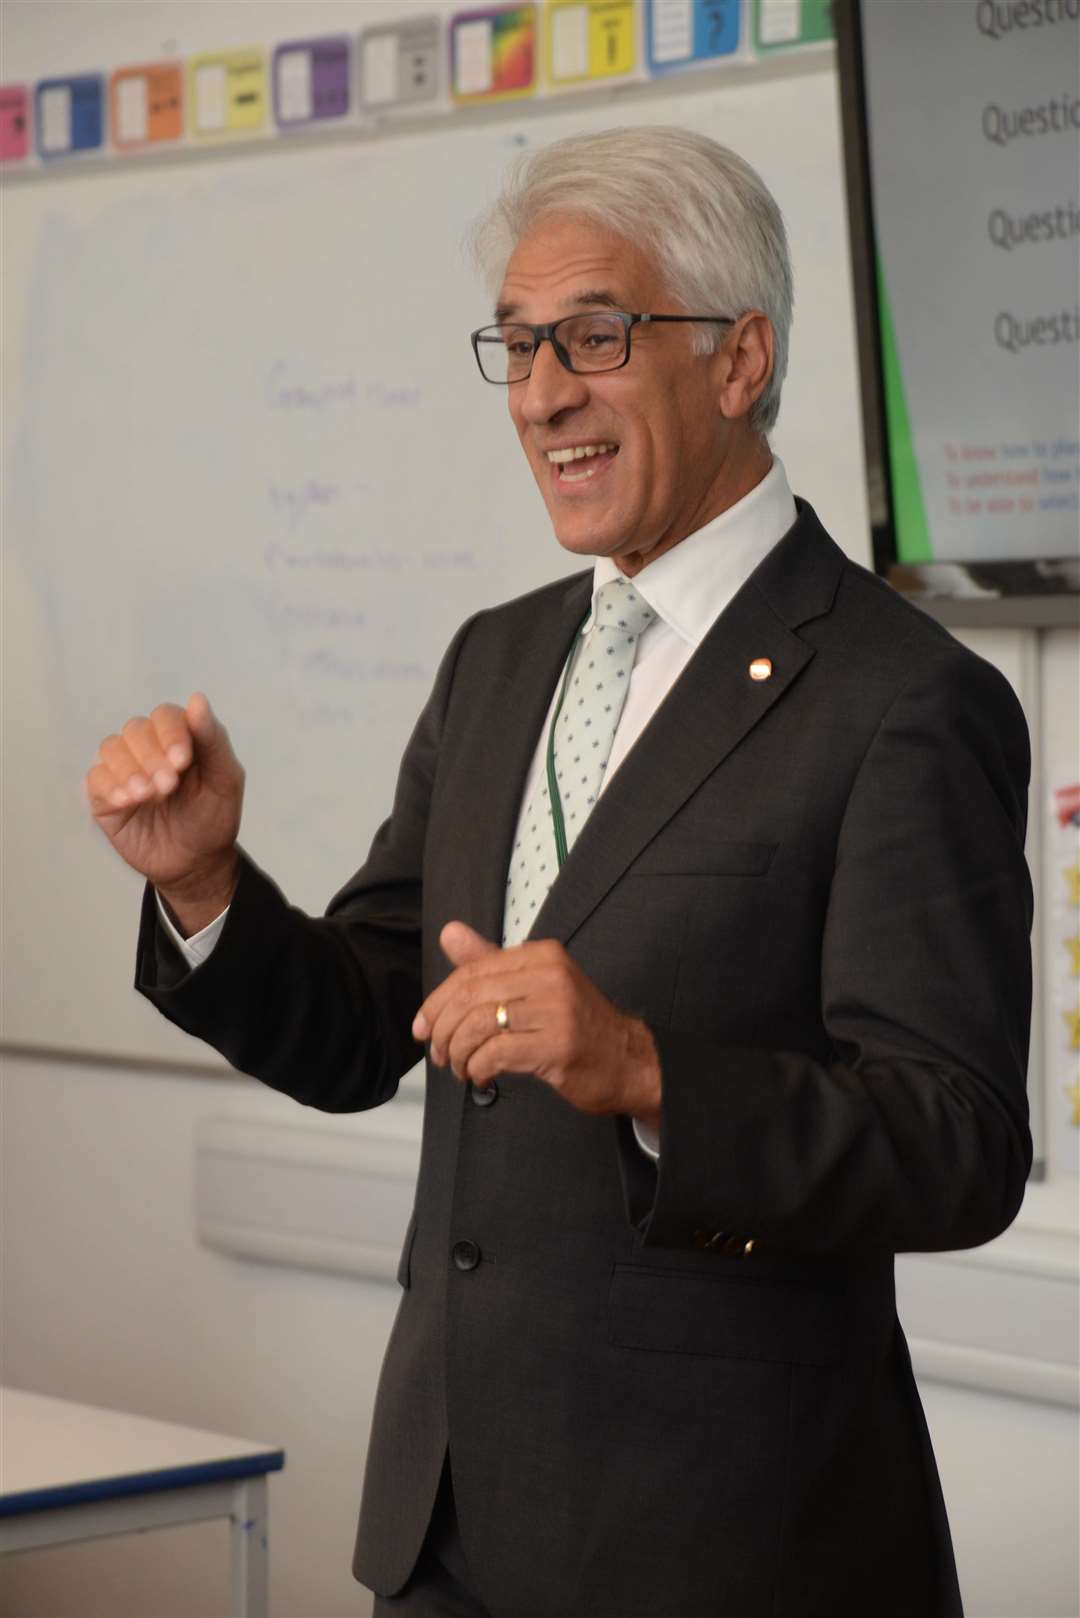 Oasis founder Steve Chalke think home learning will cause inequalities between pupils